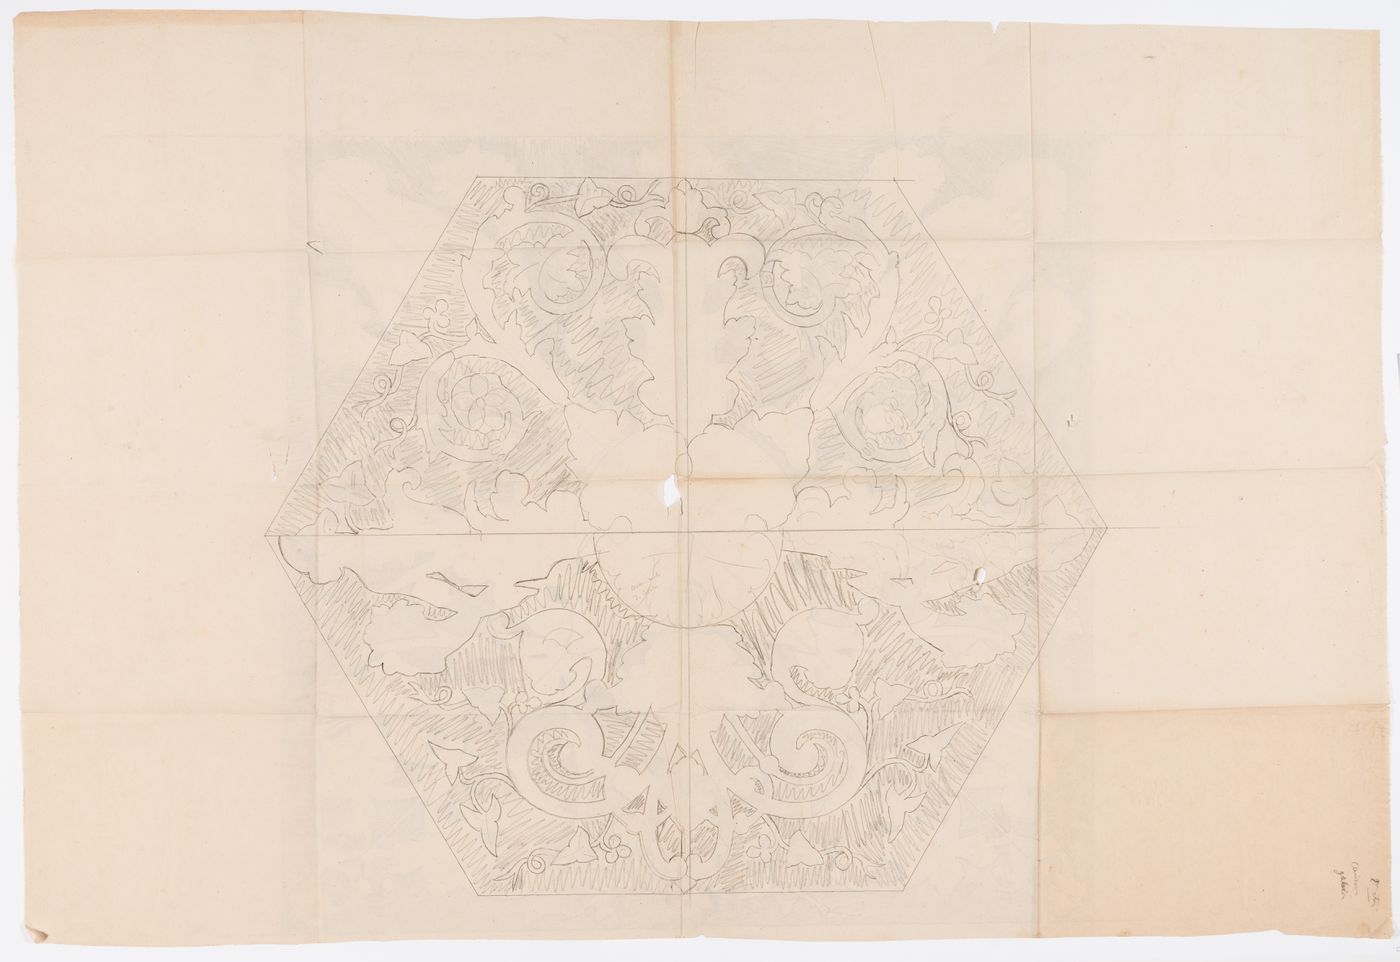 Full-scale drawing for a square ornamental panel with two variant foliate patterns, possibly for Hôtel Soltykoff; verso: Full-scale drawing for a hexagonal ornamental panel with two variant foliate patterns, possibly for Hôtel Soltykoff